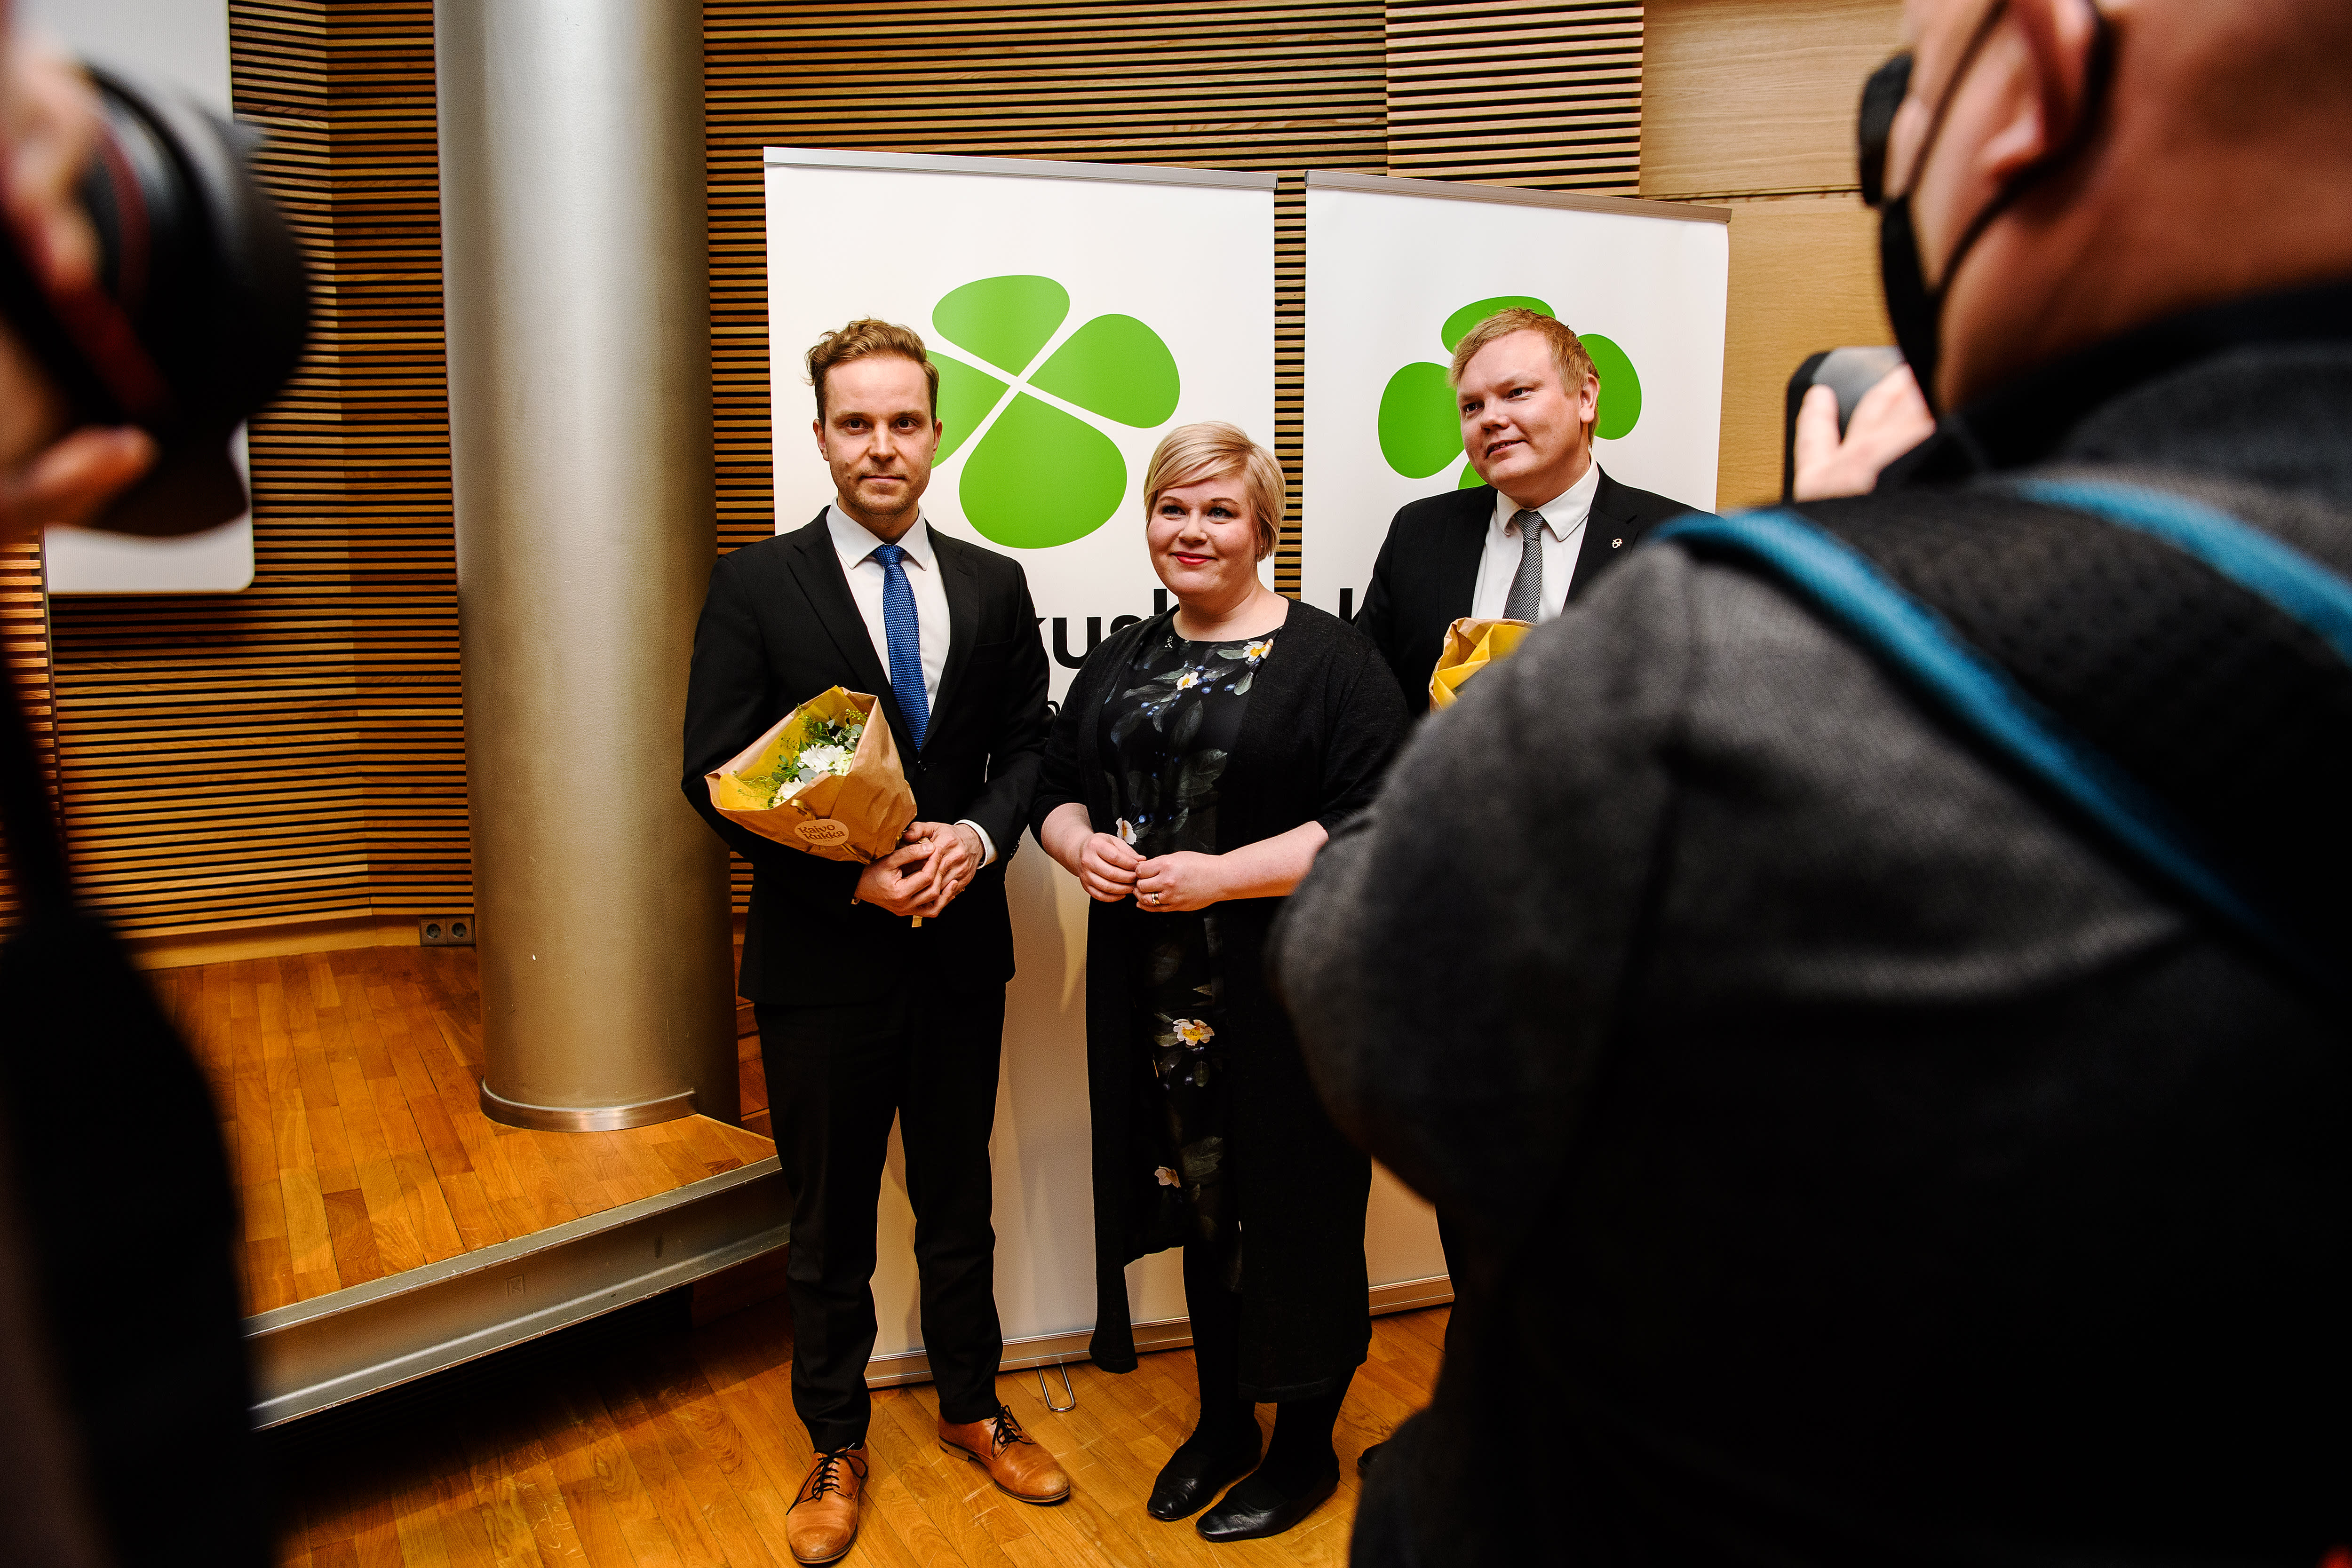 The center appoints Kurvinen Minister of Agriculture and Honkonen manages the cultural portfolio